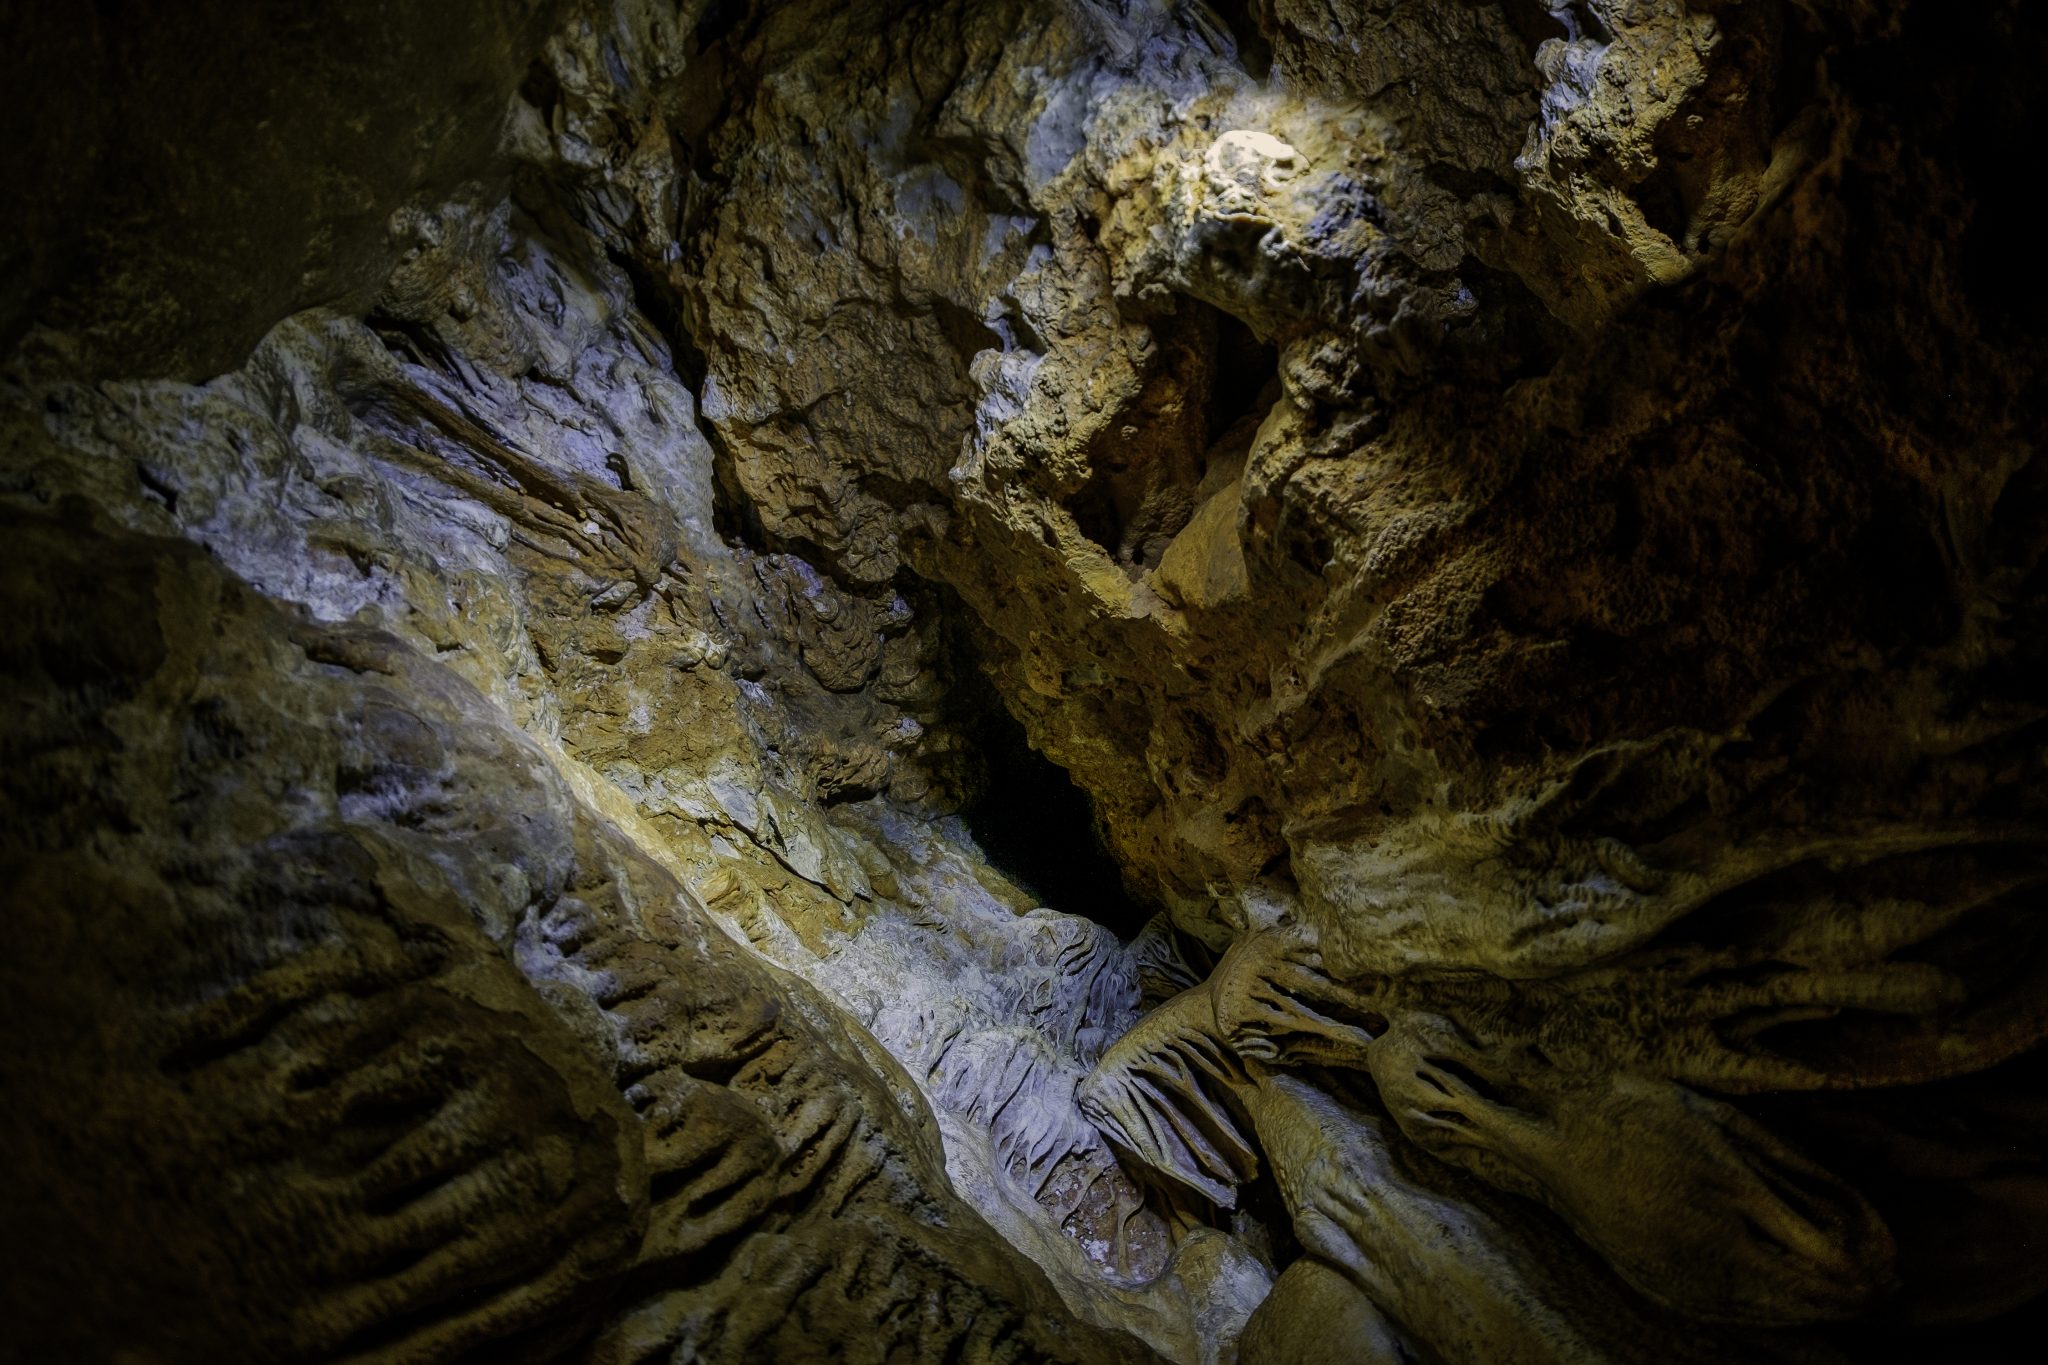 Looking upward into a cave from below. Lots of squiggly rock formations.